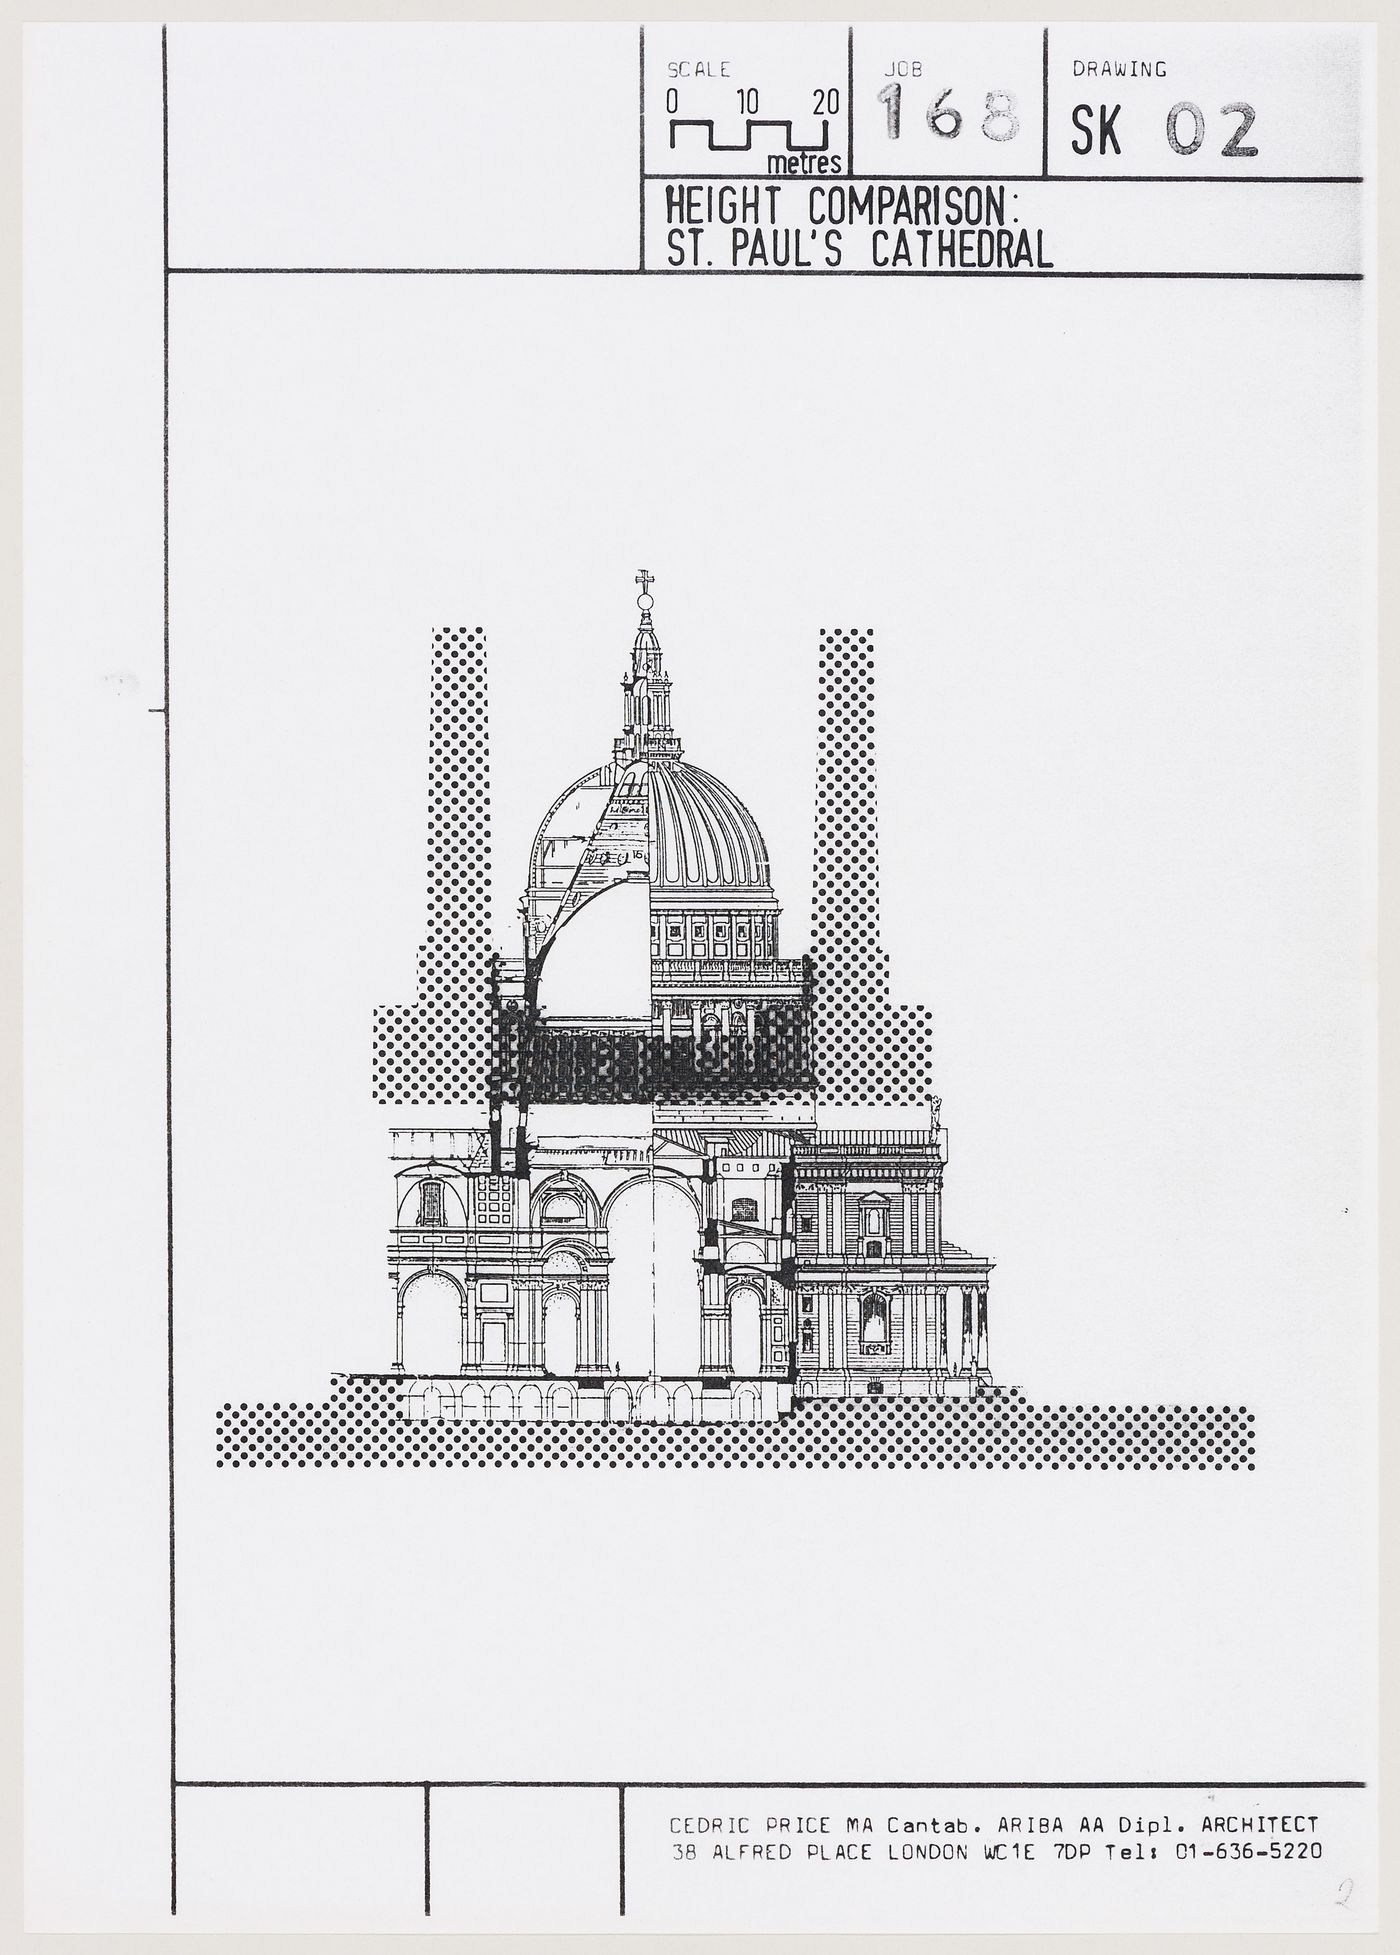 Bat Hat: Battersea Power Station Competition, entry by Cedric Price: comparison of the height of Battersea Power Station with that of St. Paul's Cathedral